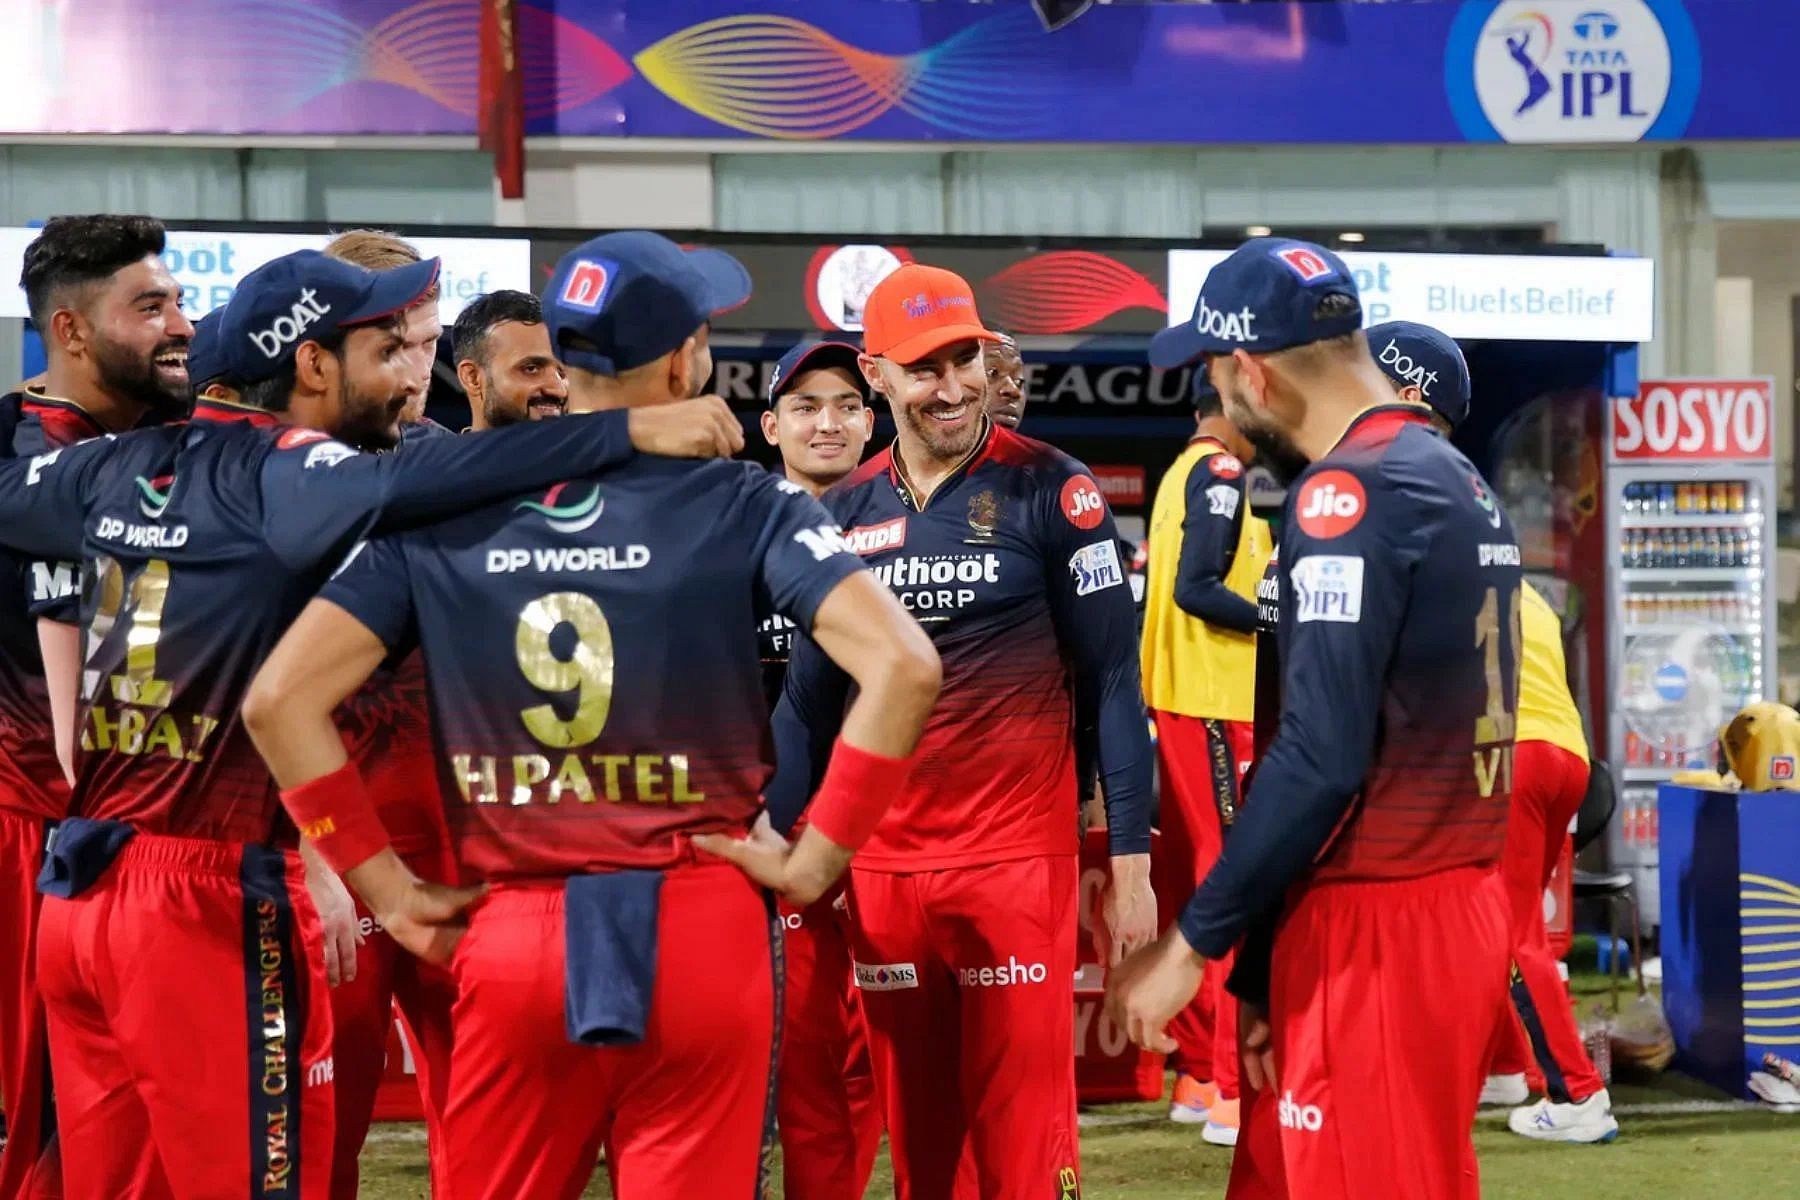 The Royal Challengers Bangalore released only five players ahead of the IPL 2023 auction. [P/C: iplt20.com]